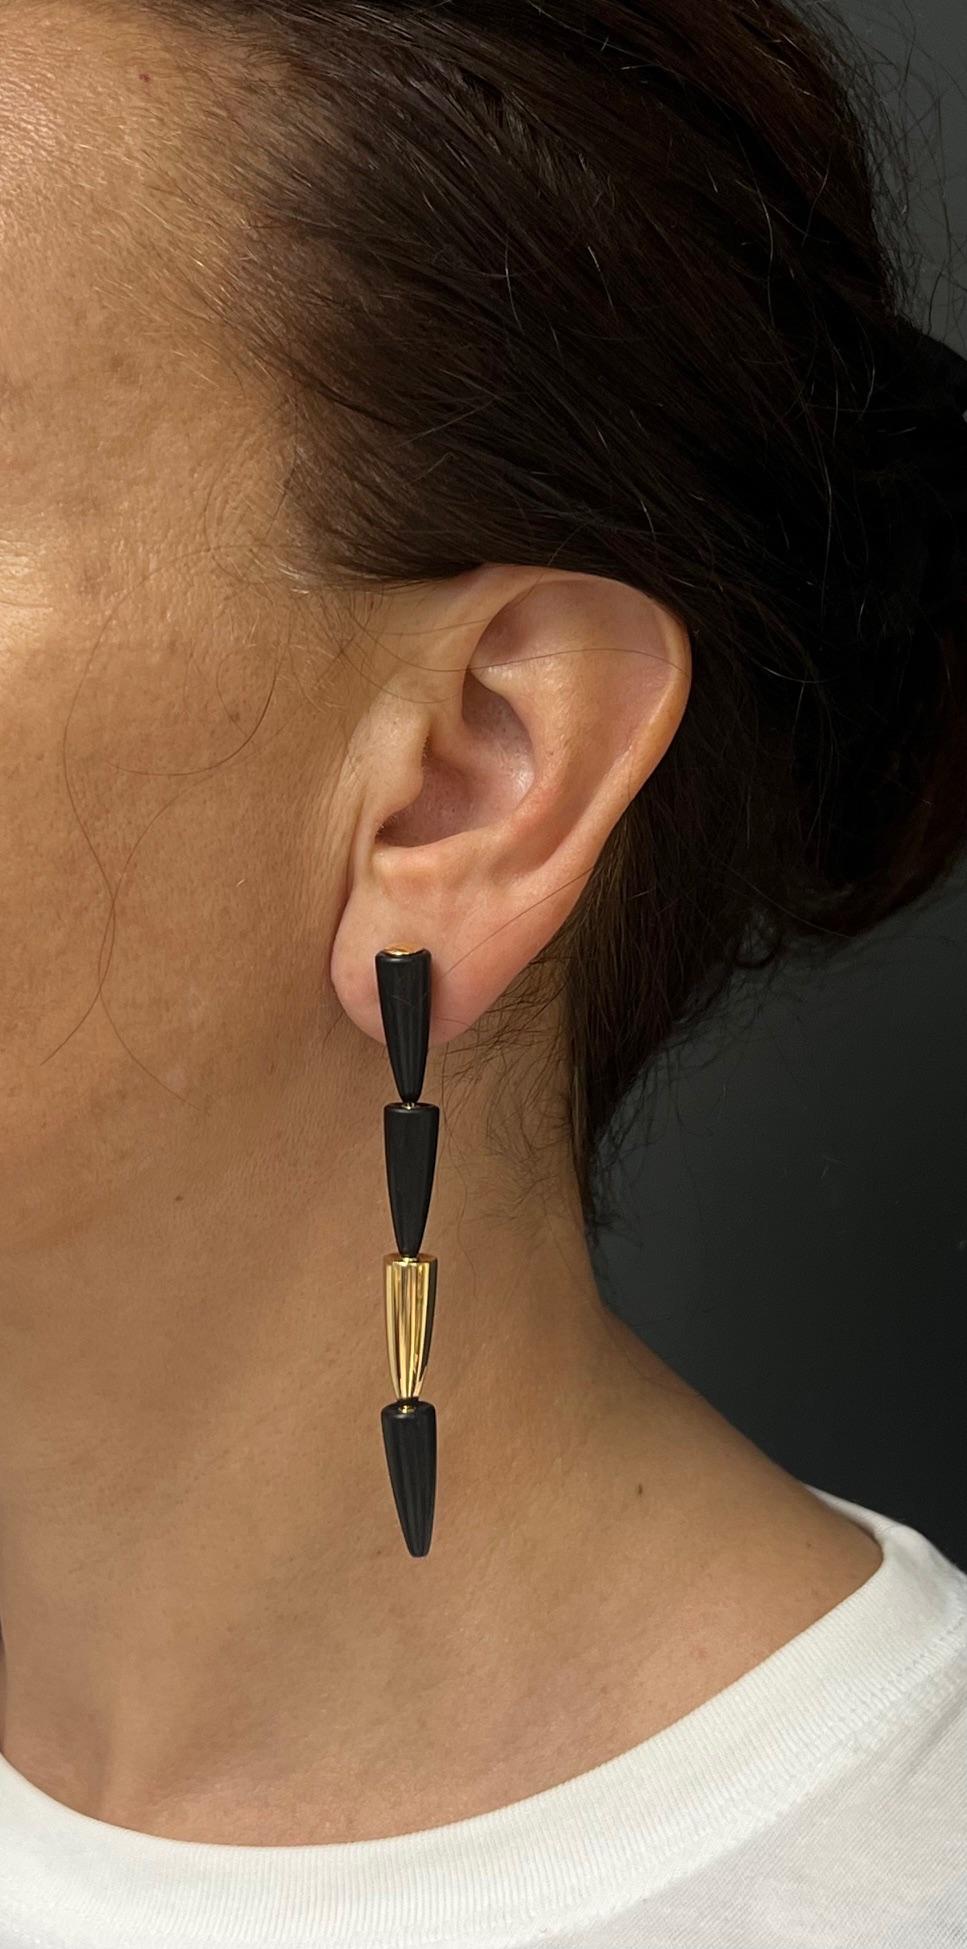 Futuristic earrings by Vhernier, from Calla collection, made in 18k gold and ebony wood. Elongated silhouette earrings consist of four cones vertically nested in each other. One silky polished gold cone alternated with three wood cones. The darkness